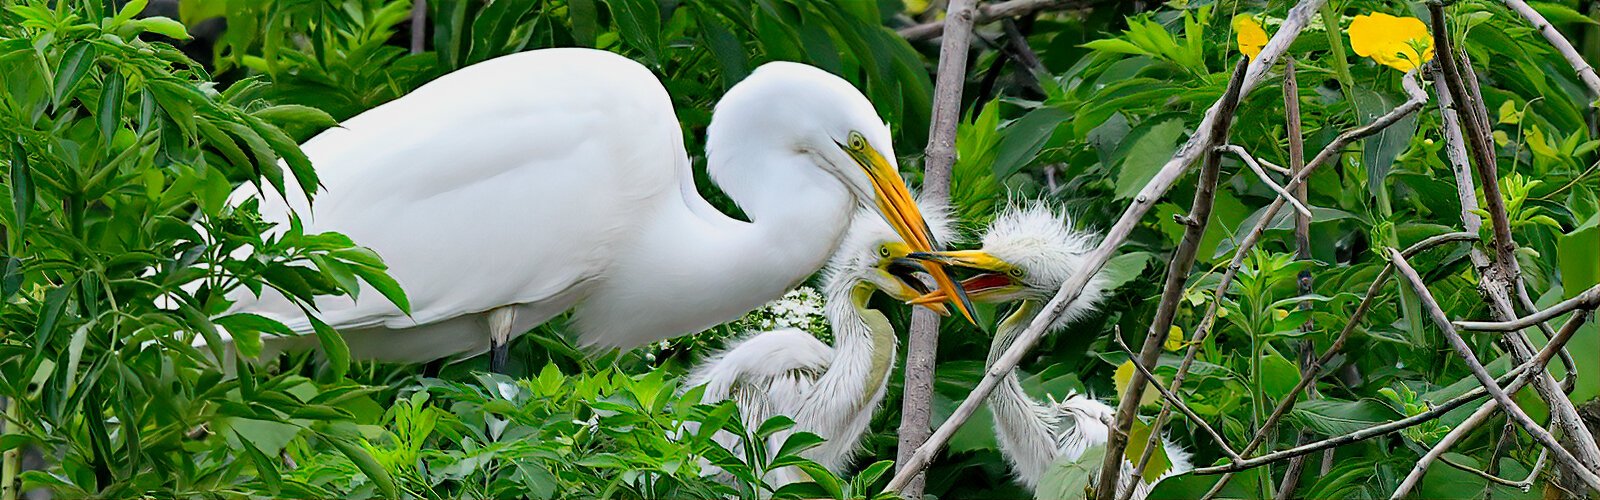 Having just returned to the nest, this great egret is quickly harassed by her two hungry chicks aggressively yanking at her bill. This activates the fish-regurgitation process from her bill into theirs. 